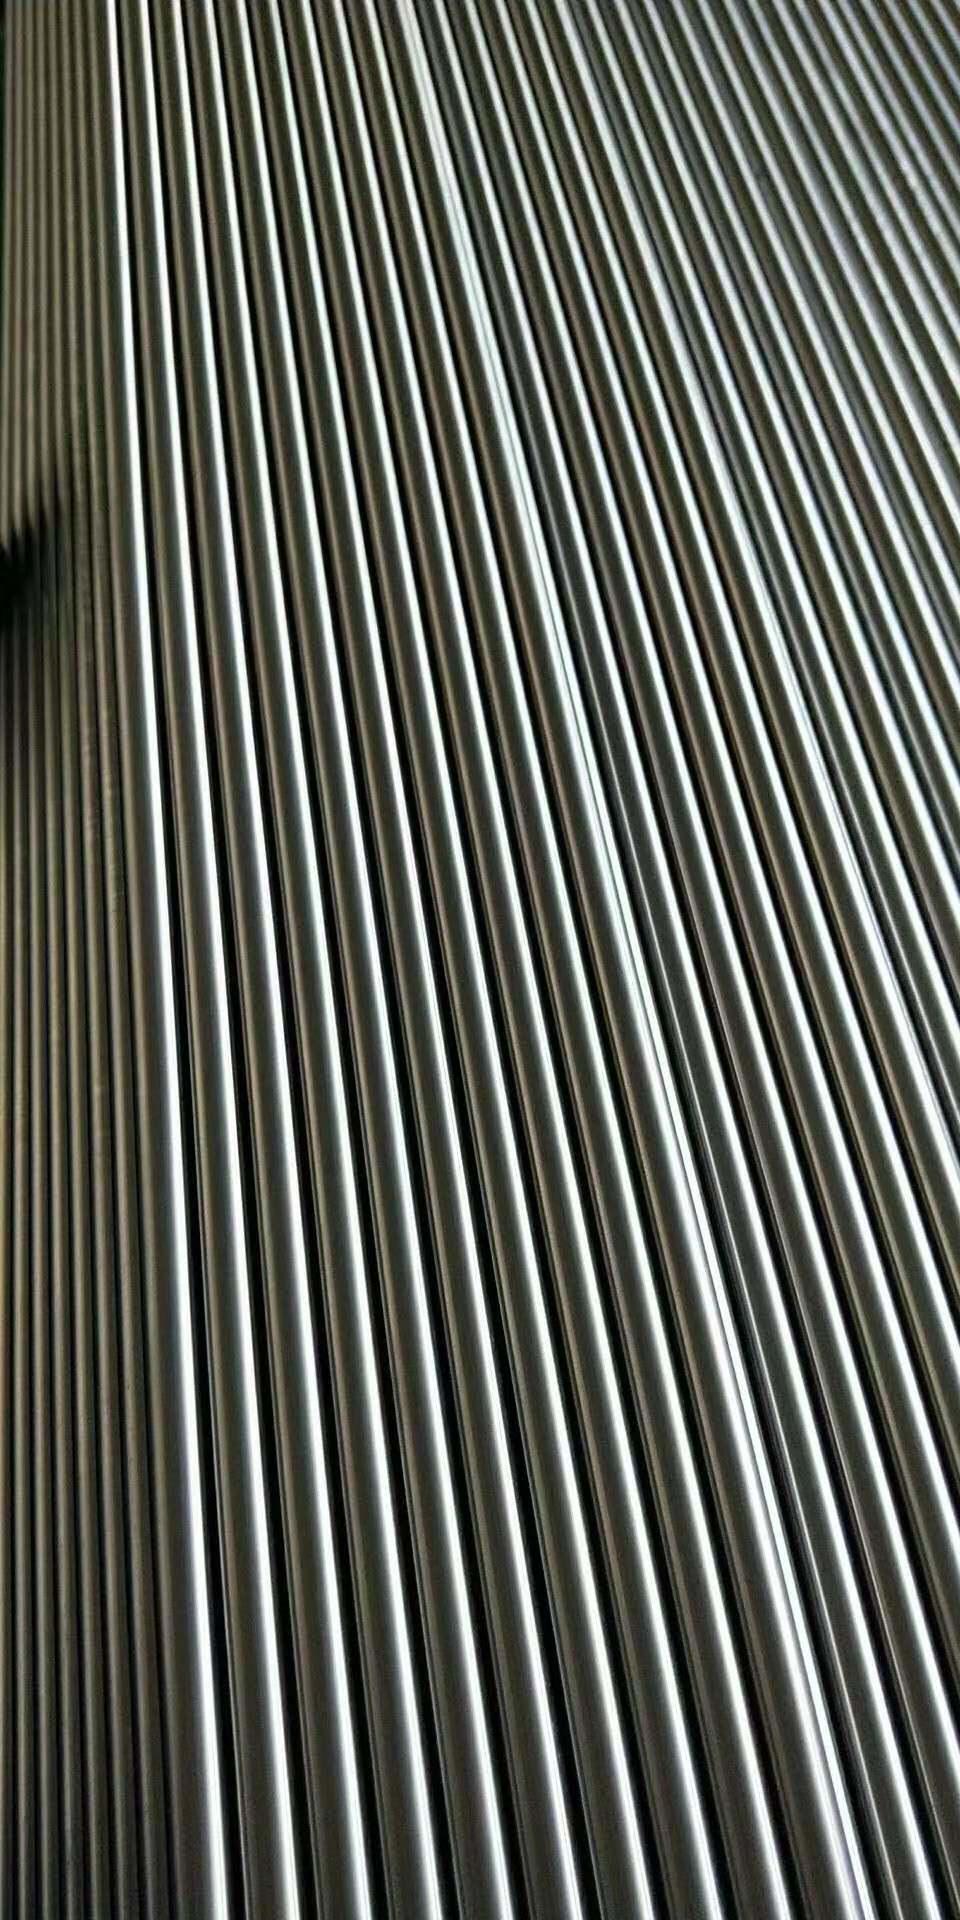 1.4845 S31008 Ss 310S Stainless Steel Bars and Rods Round Bar